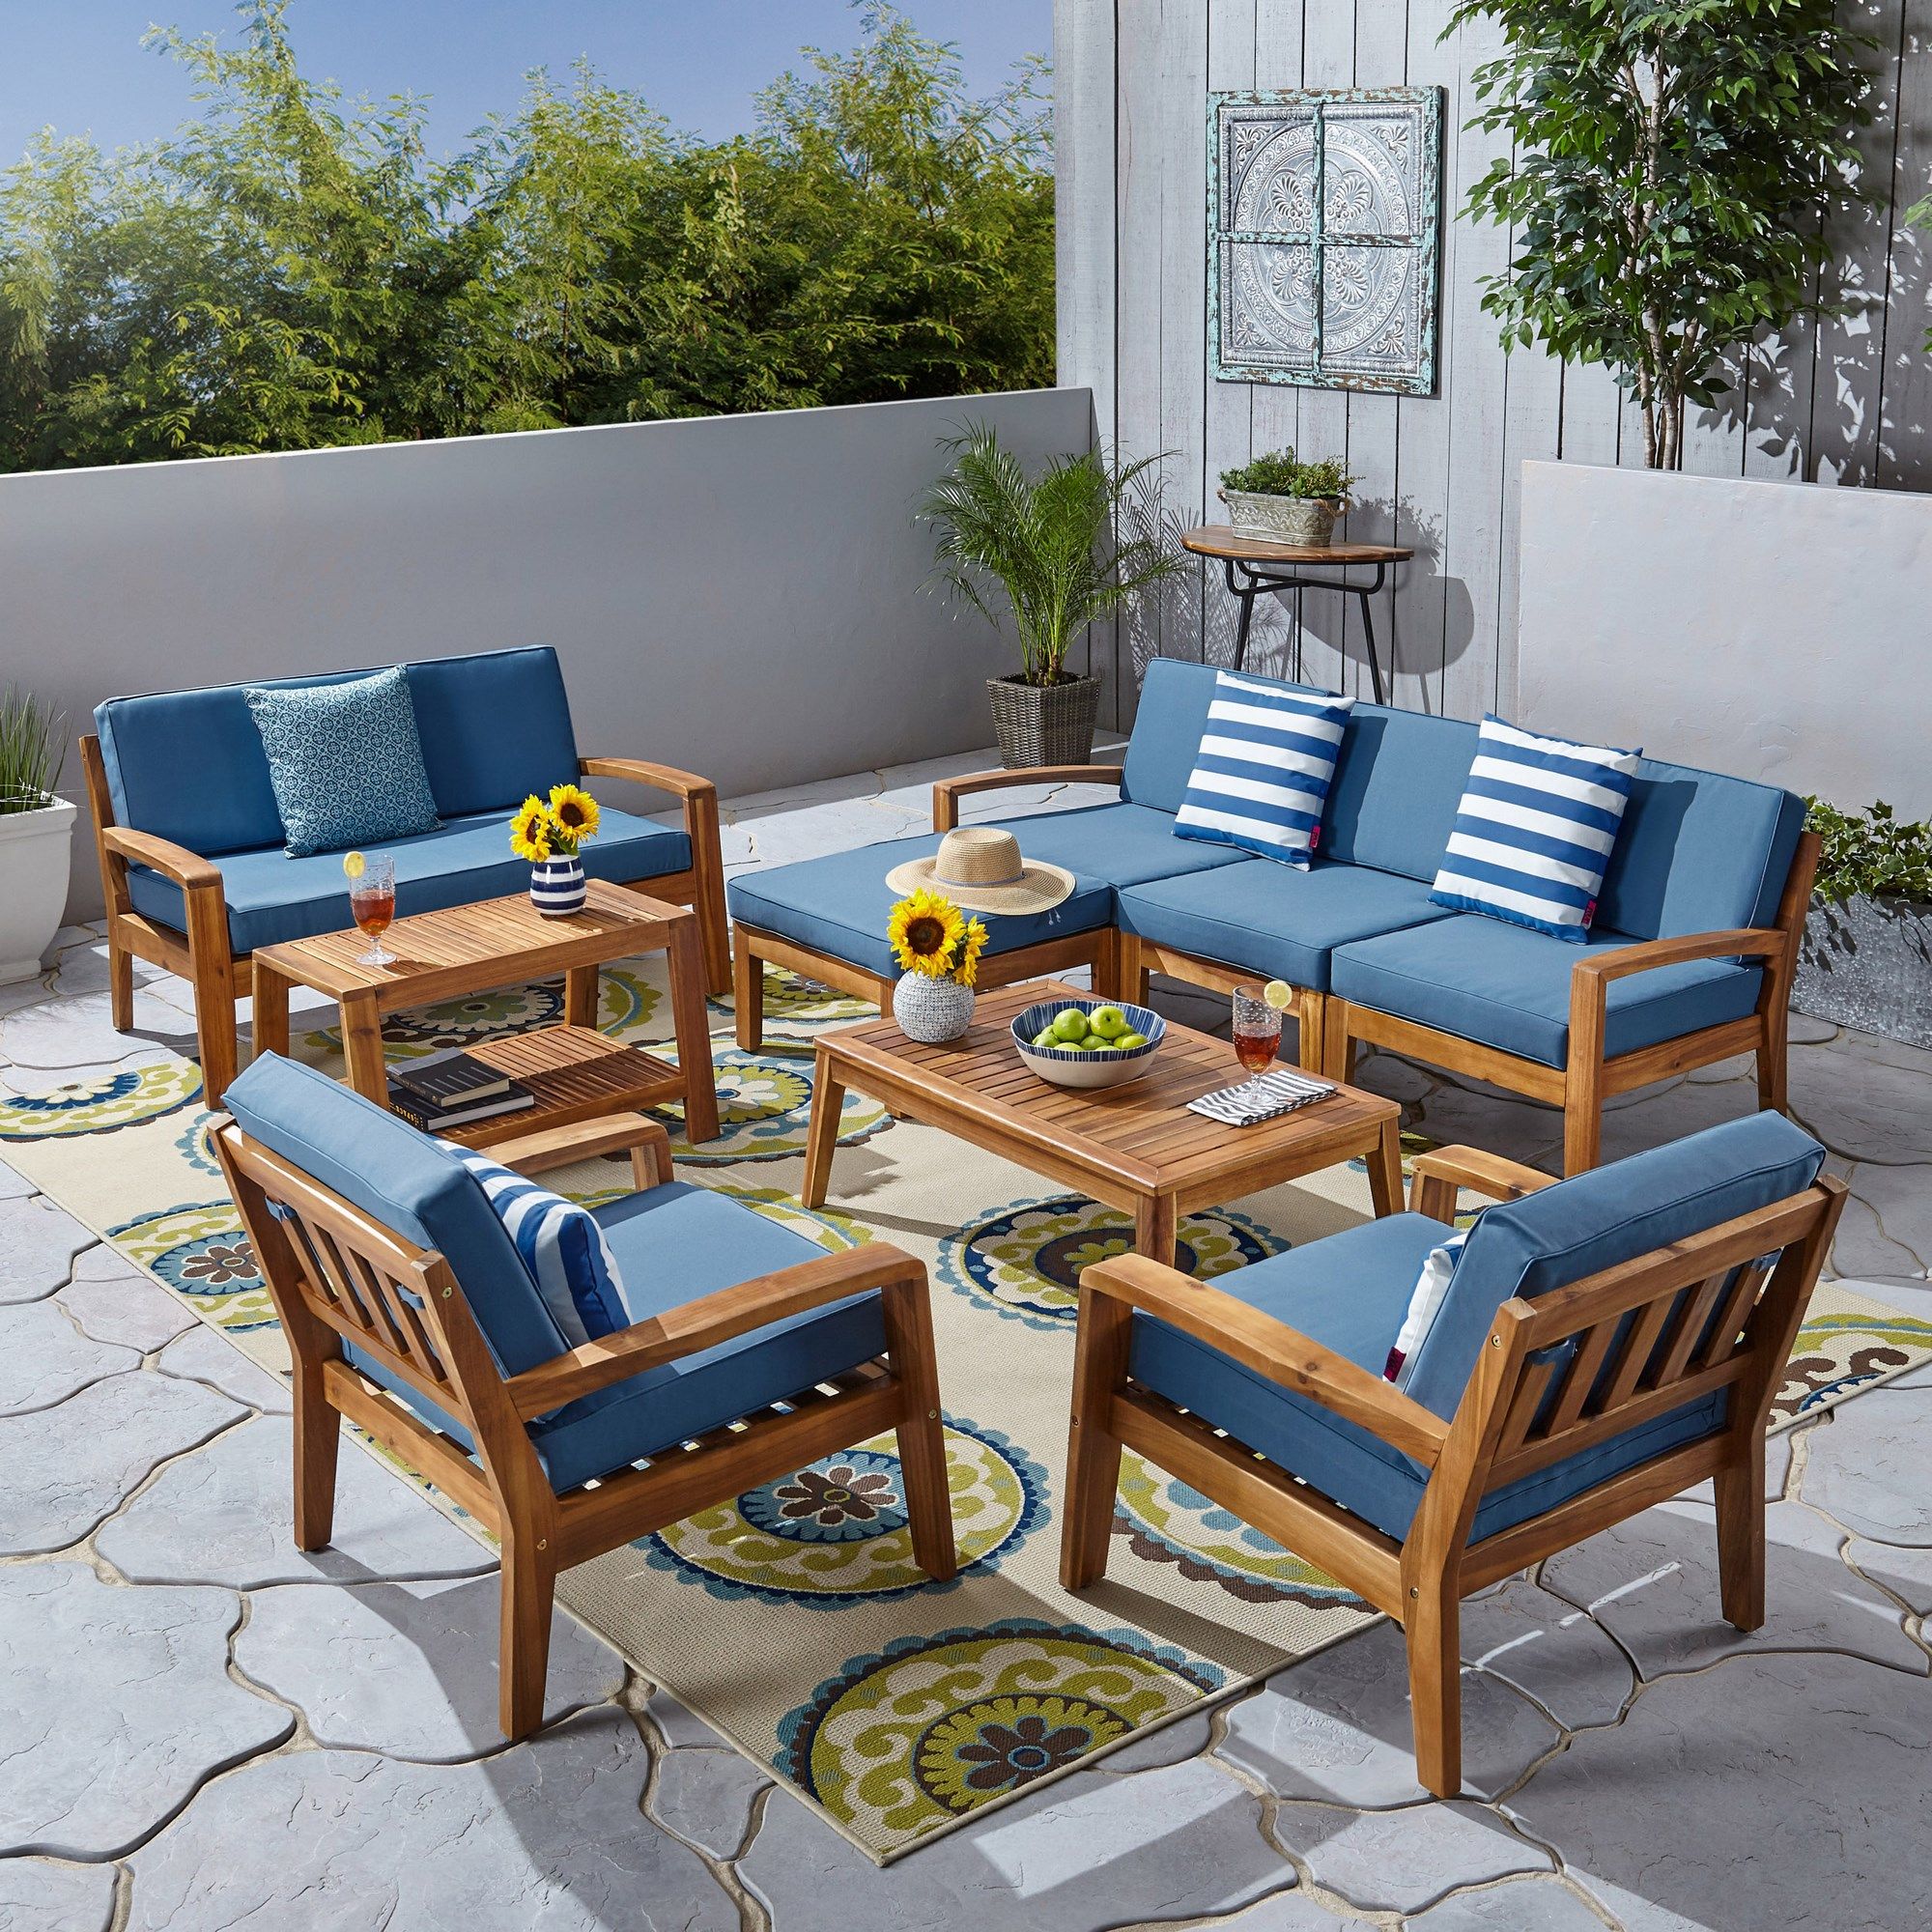 Grenada 7 Seater Sectional Sofa Set For Patio With Loveseat, Club Chairs,  Ottoman, And Coffee Tables, Acacia Wood, Teak Finish With Blue Outdoor  Cushions Pertaining To Outdoor Cushioned Chair Loveseat Tables (Photo 12 of 15)